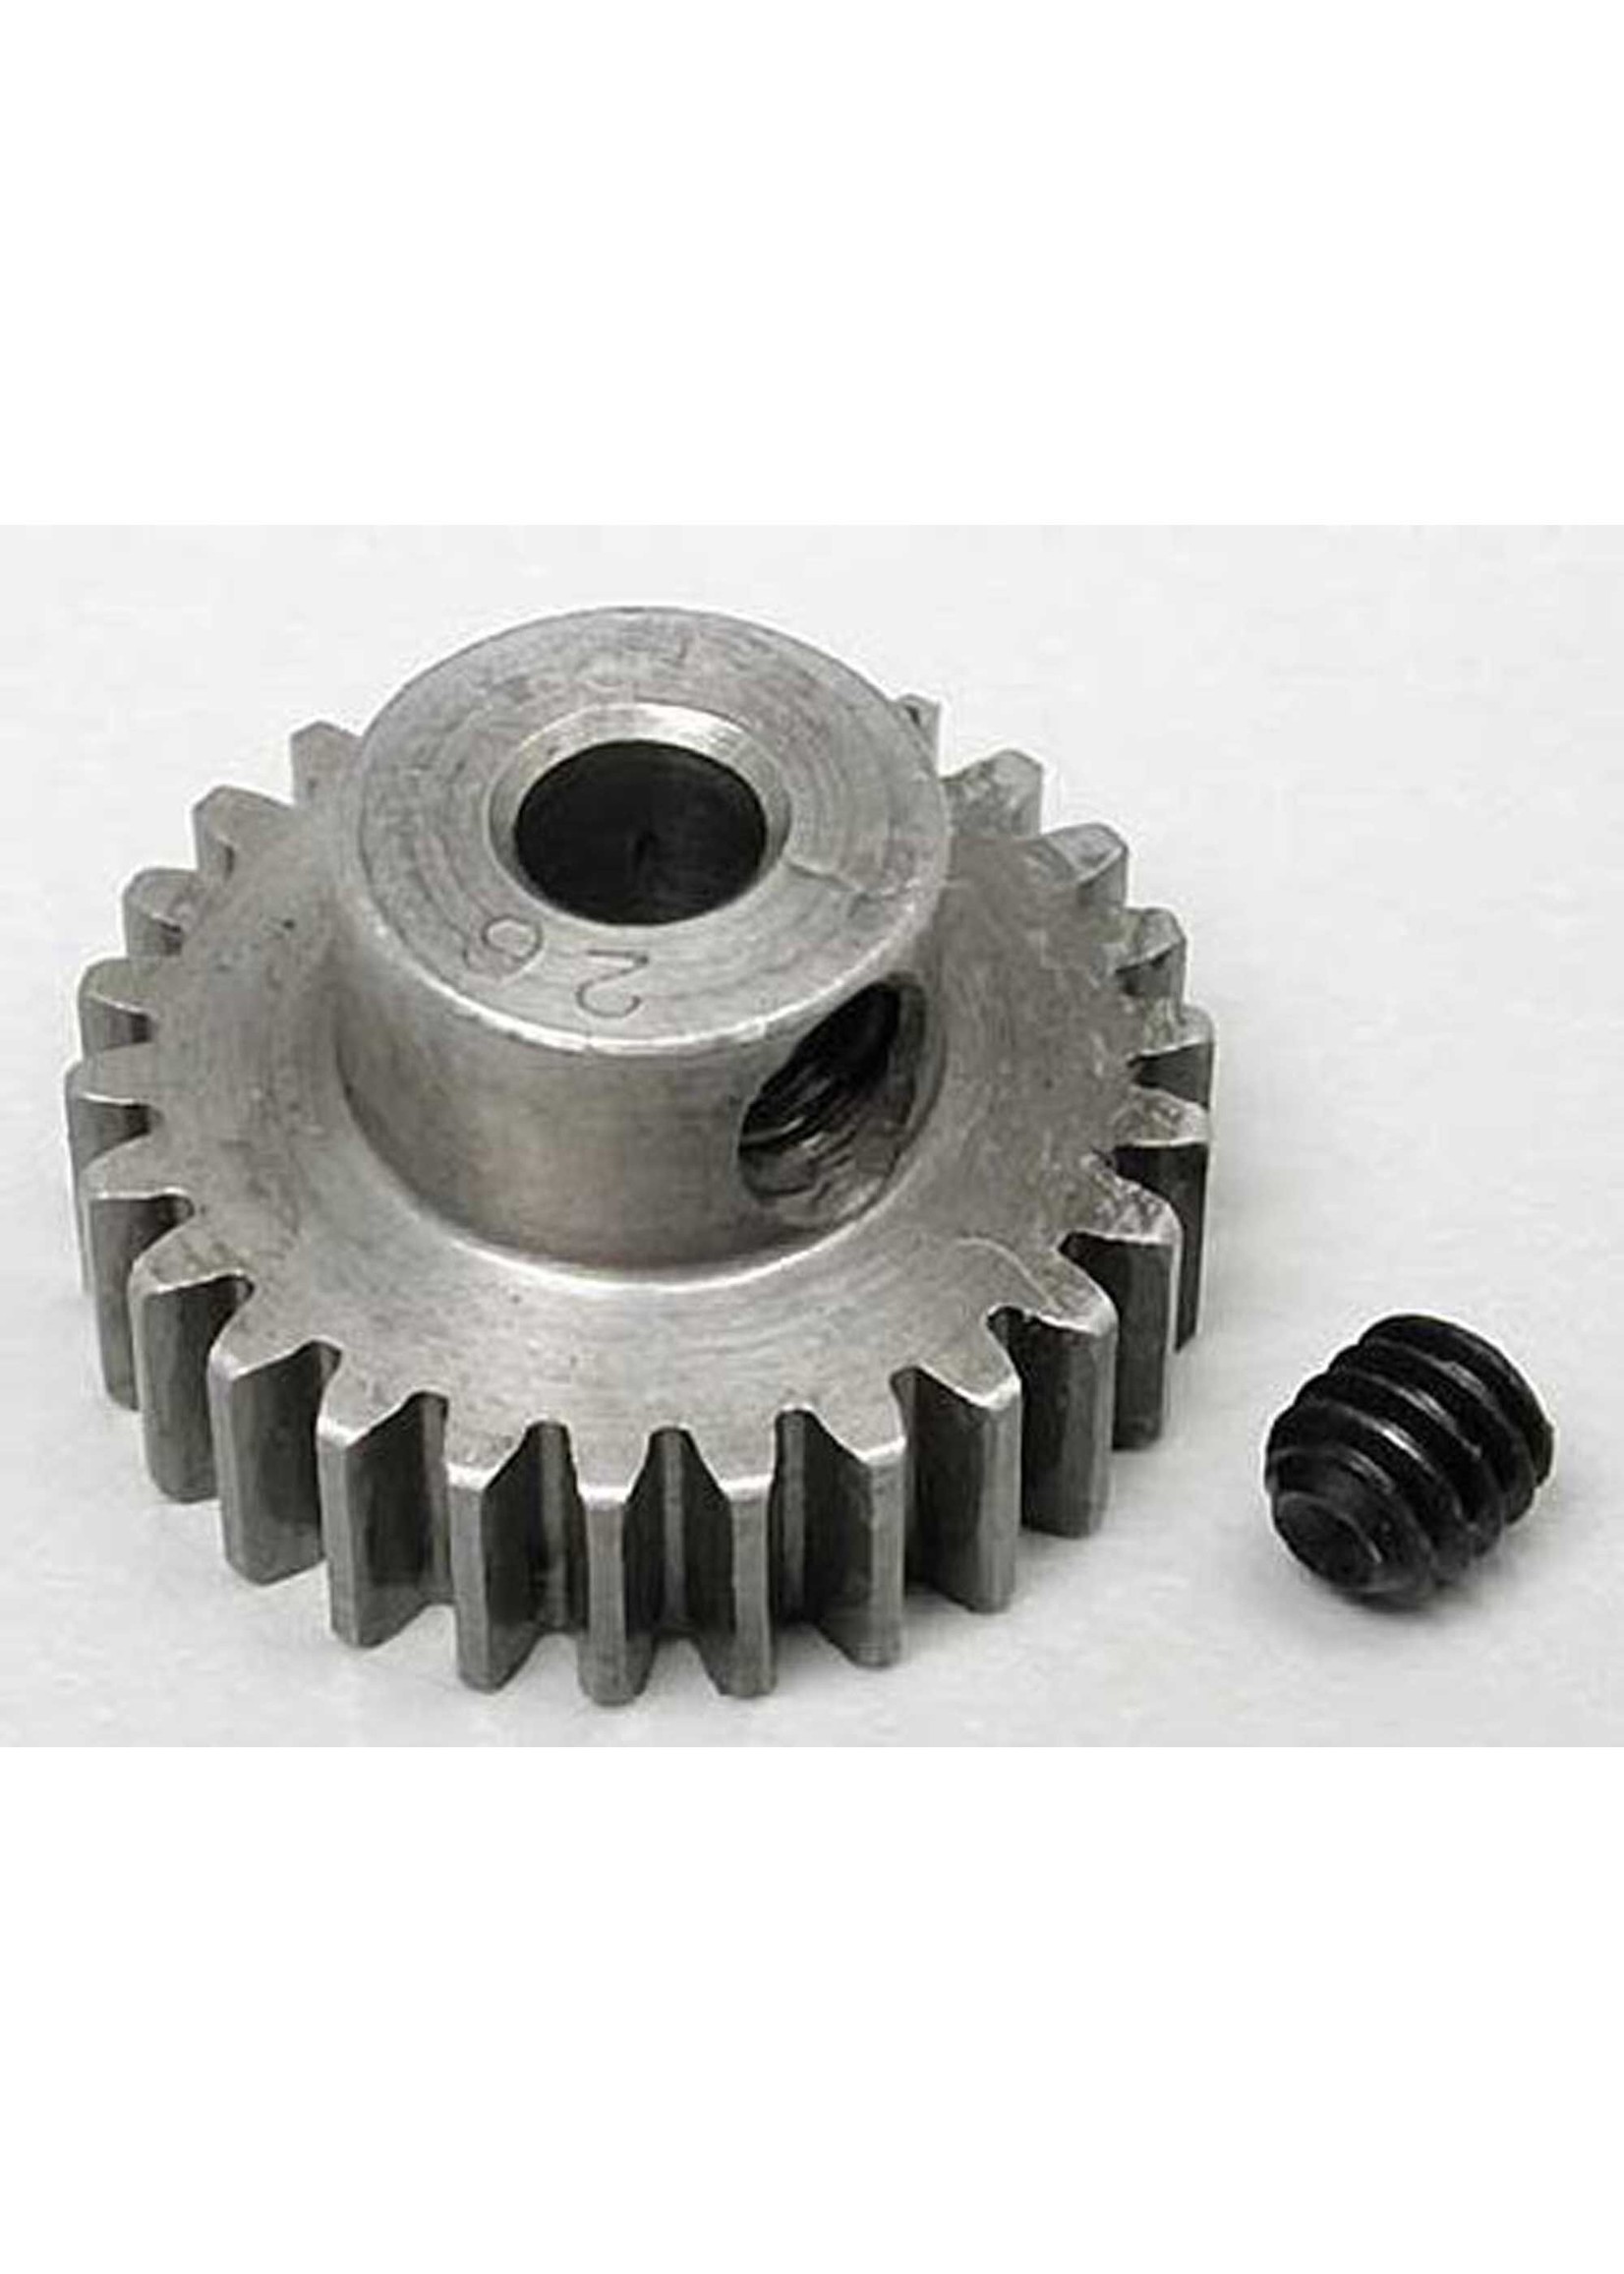 Robinson Racing Products RRP1426 Robinson Racing Products Super Hard ''Absolute'' 48P Steel Pinion Gear (26T)